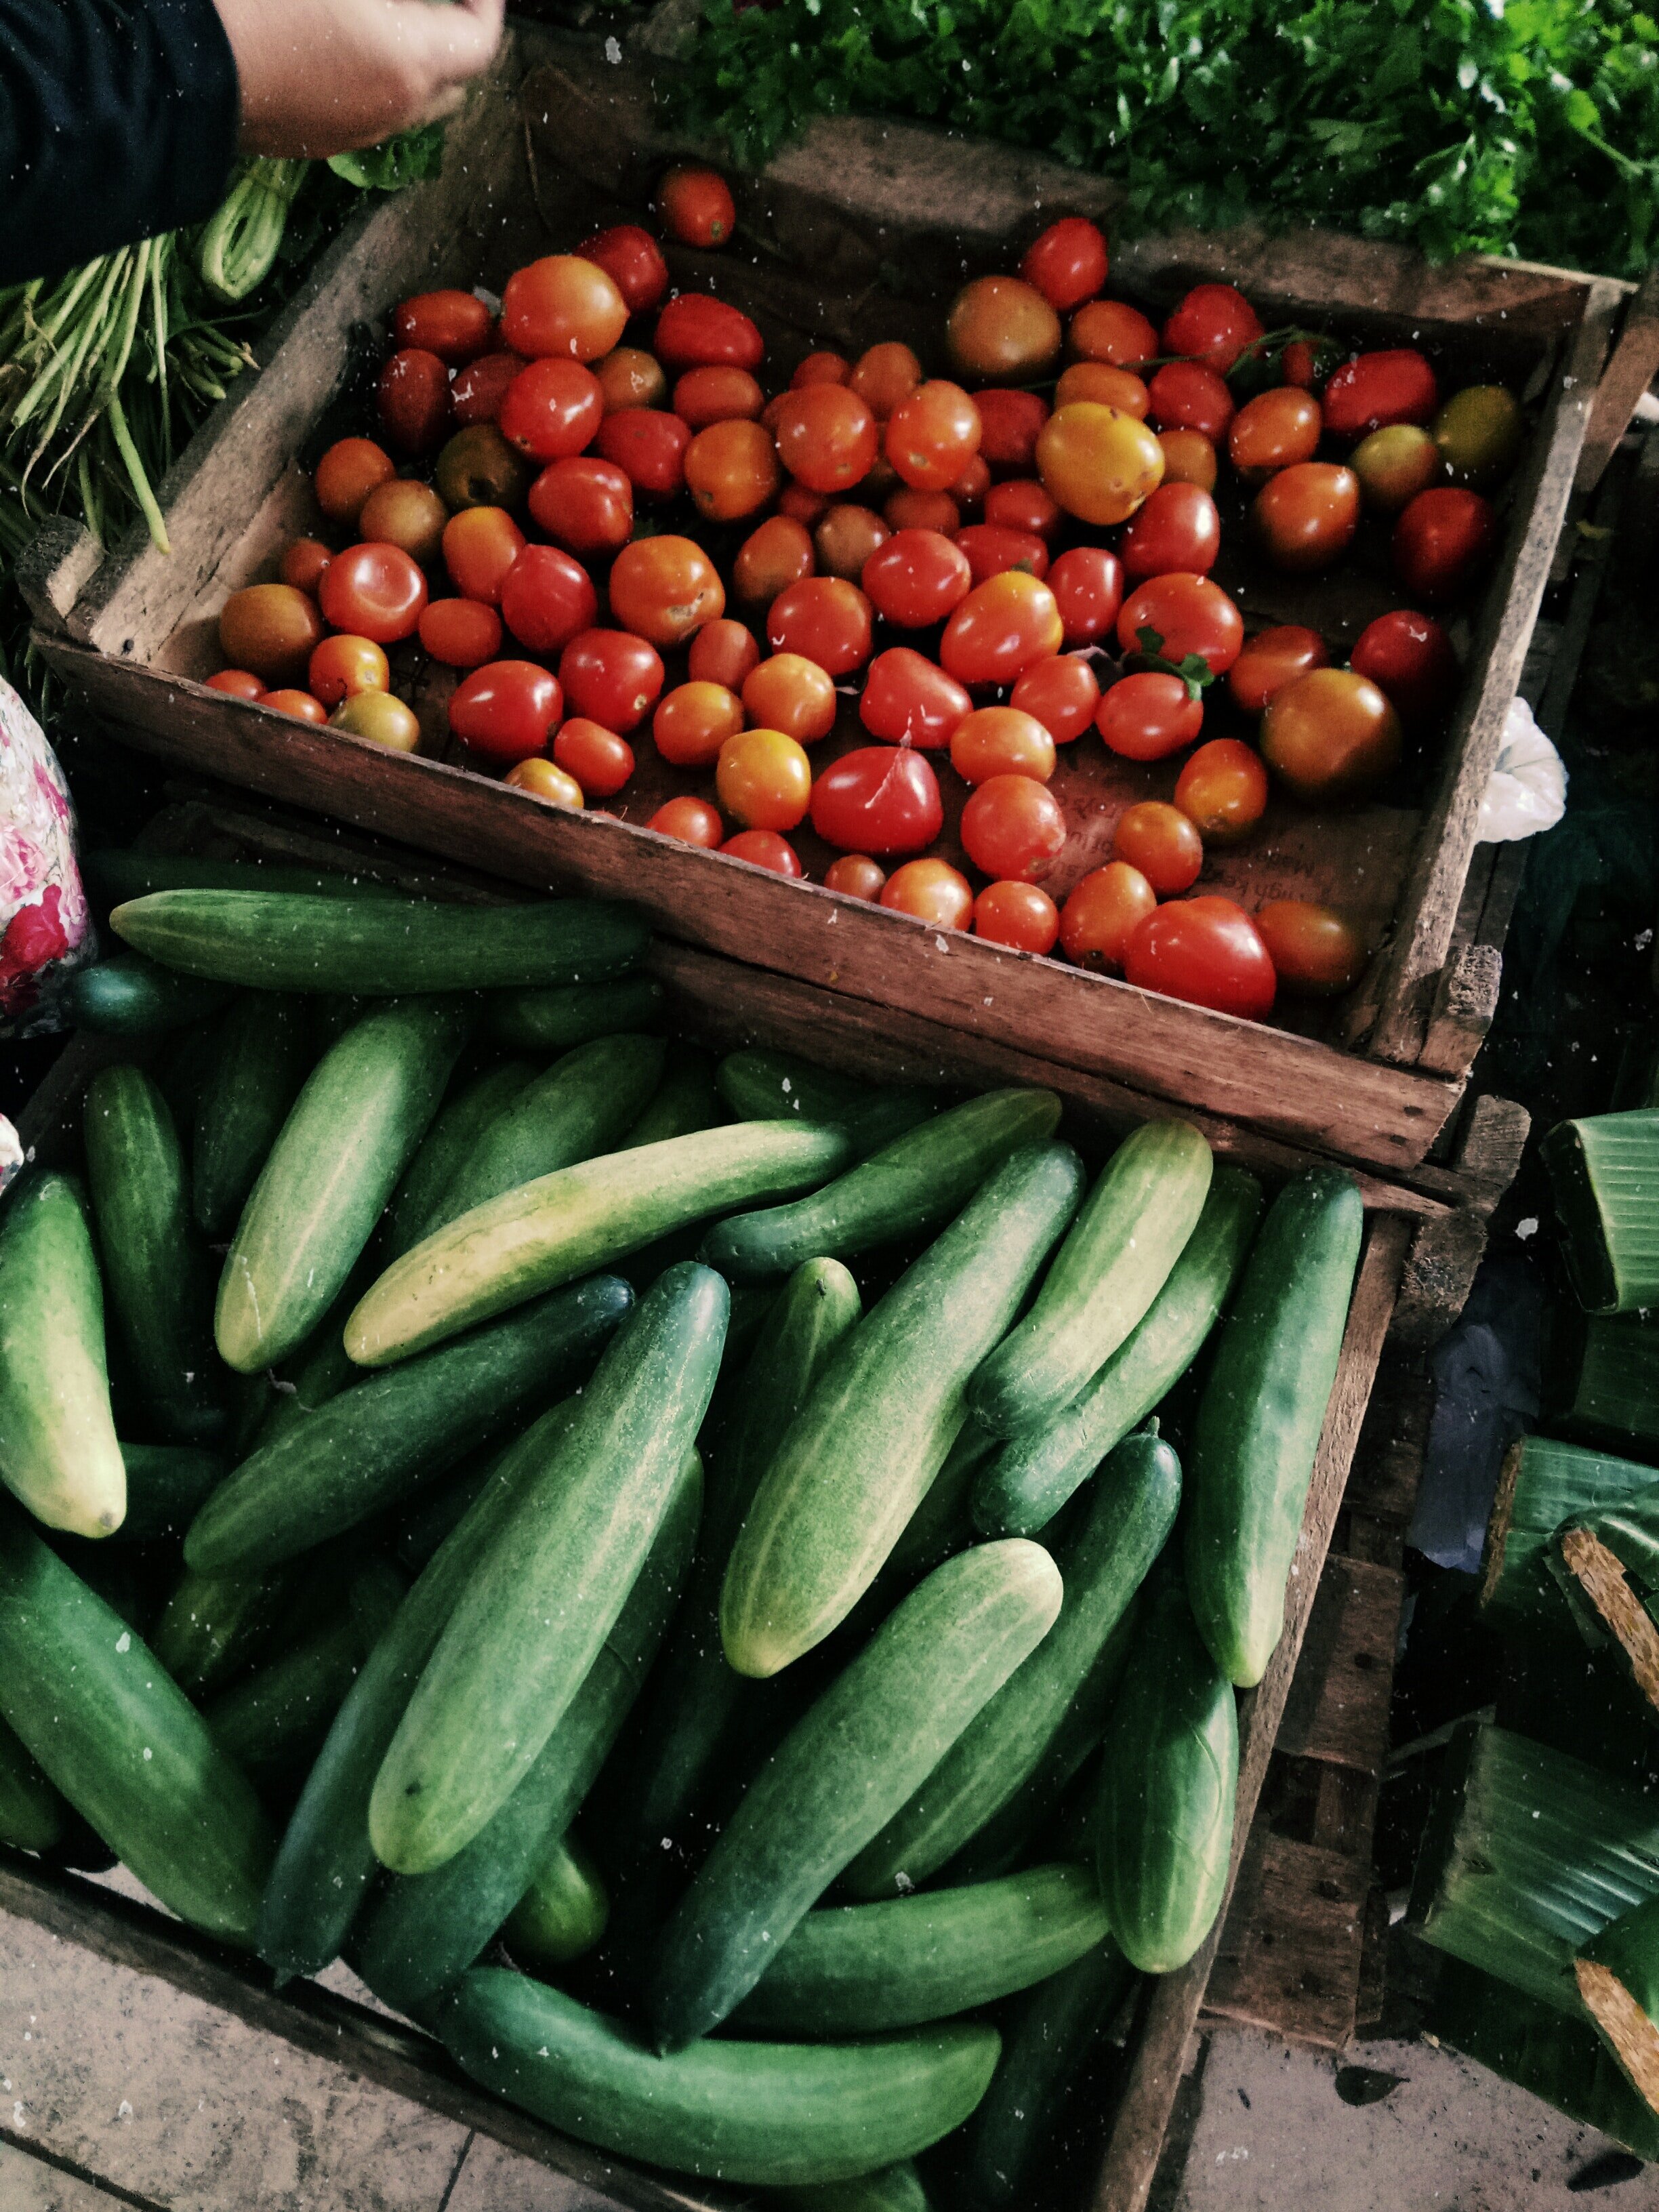 photo-of-cucumbers-and-tomatoes-in-wooden-crates-1691180.jpg